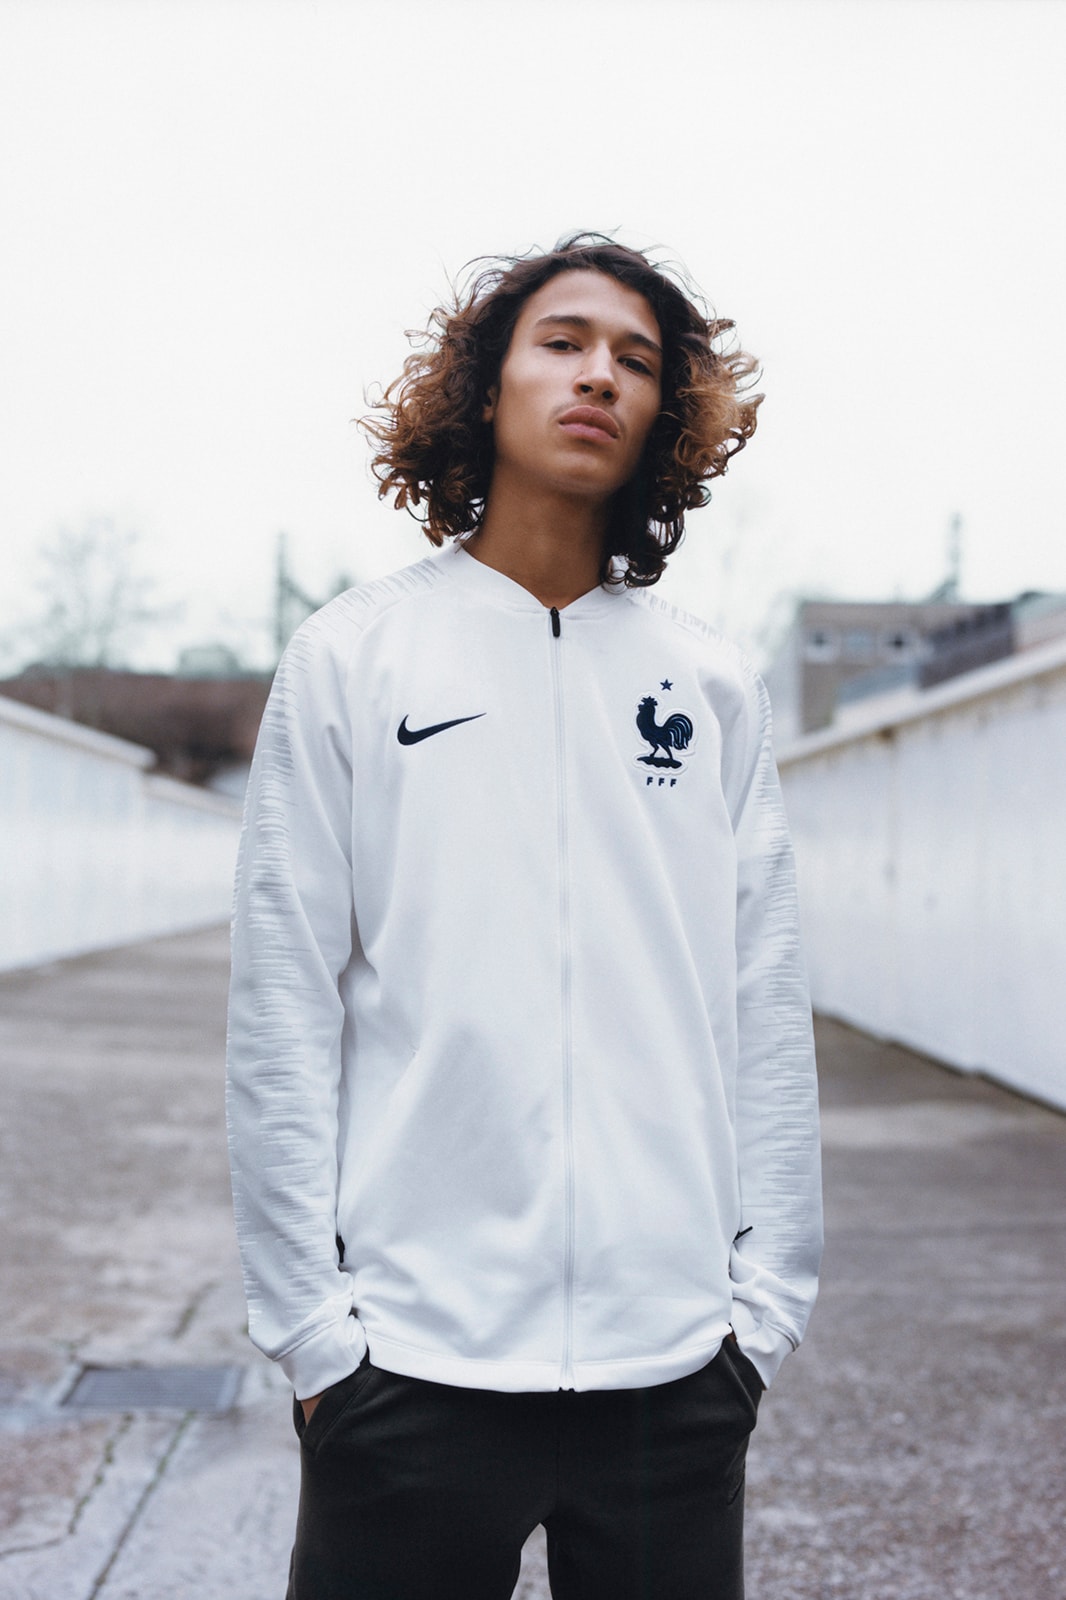 Nike Football French World Cup 2018 Soccer Collection Home Kits Jersey Away Kit FIFA Warm Up Tricolore Mariniere Release Info Buy Details Kingsley Coman Raphael Varane